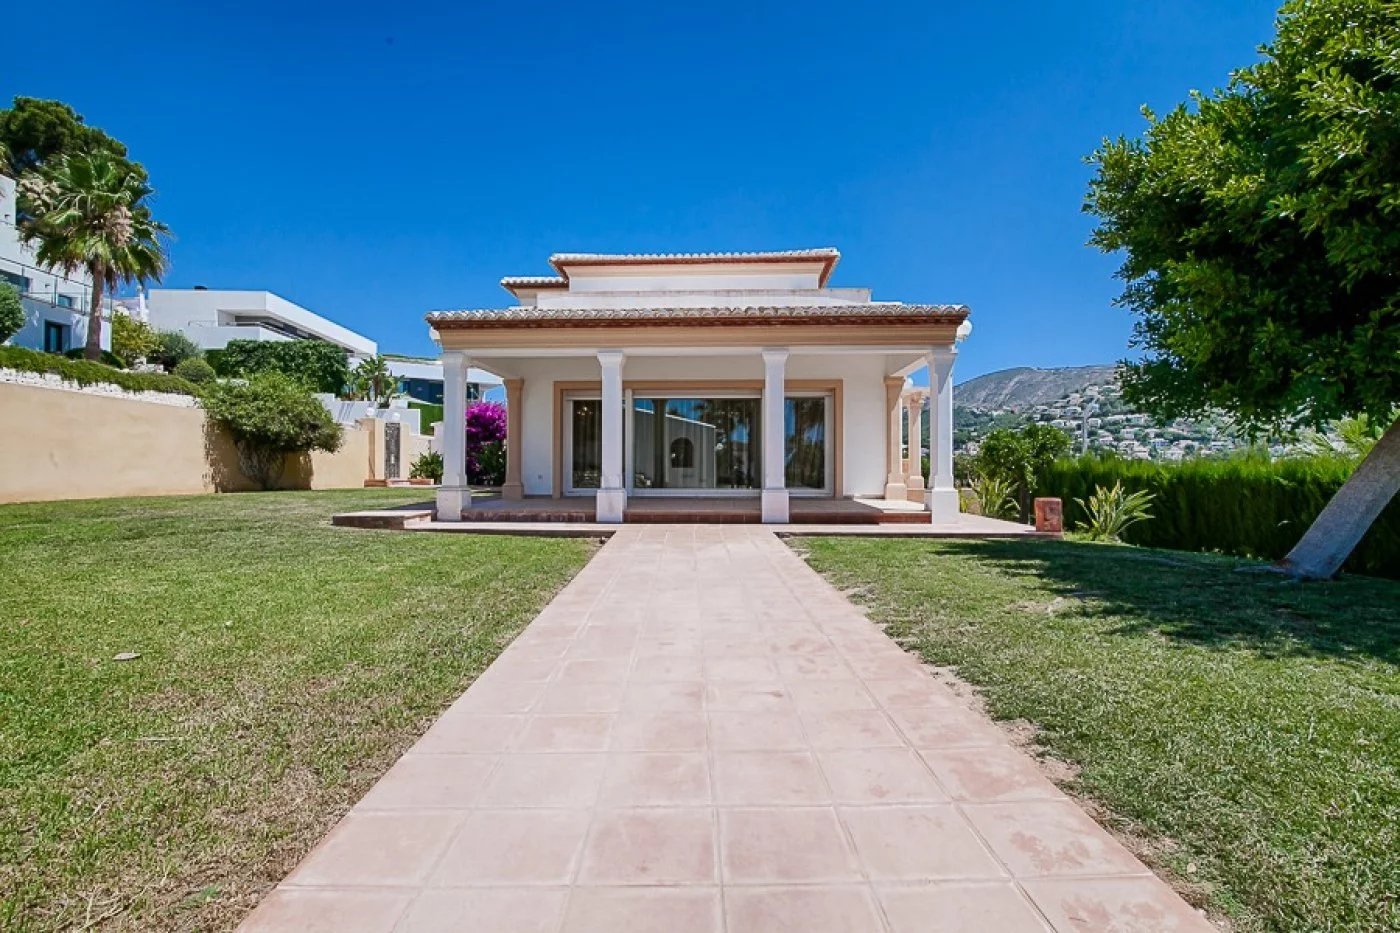 Majestic villa on very large and completely flat plot